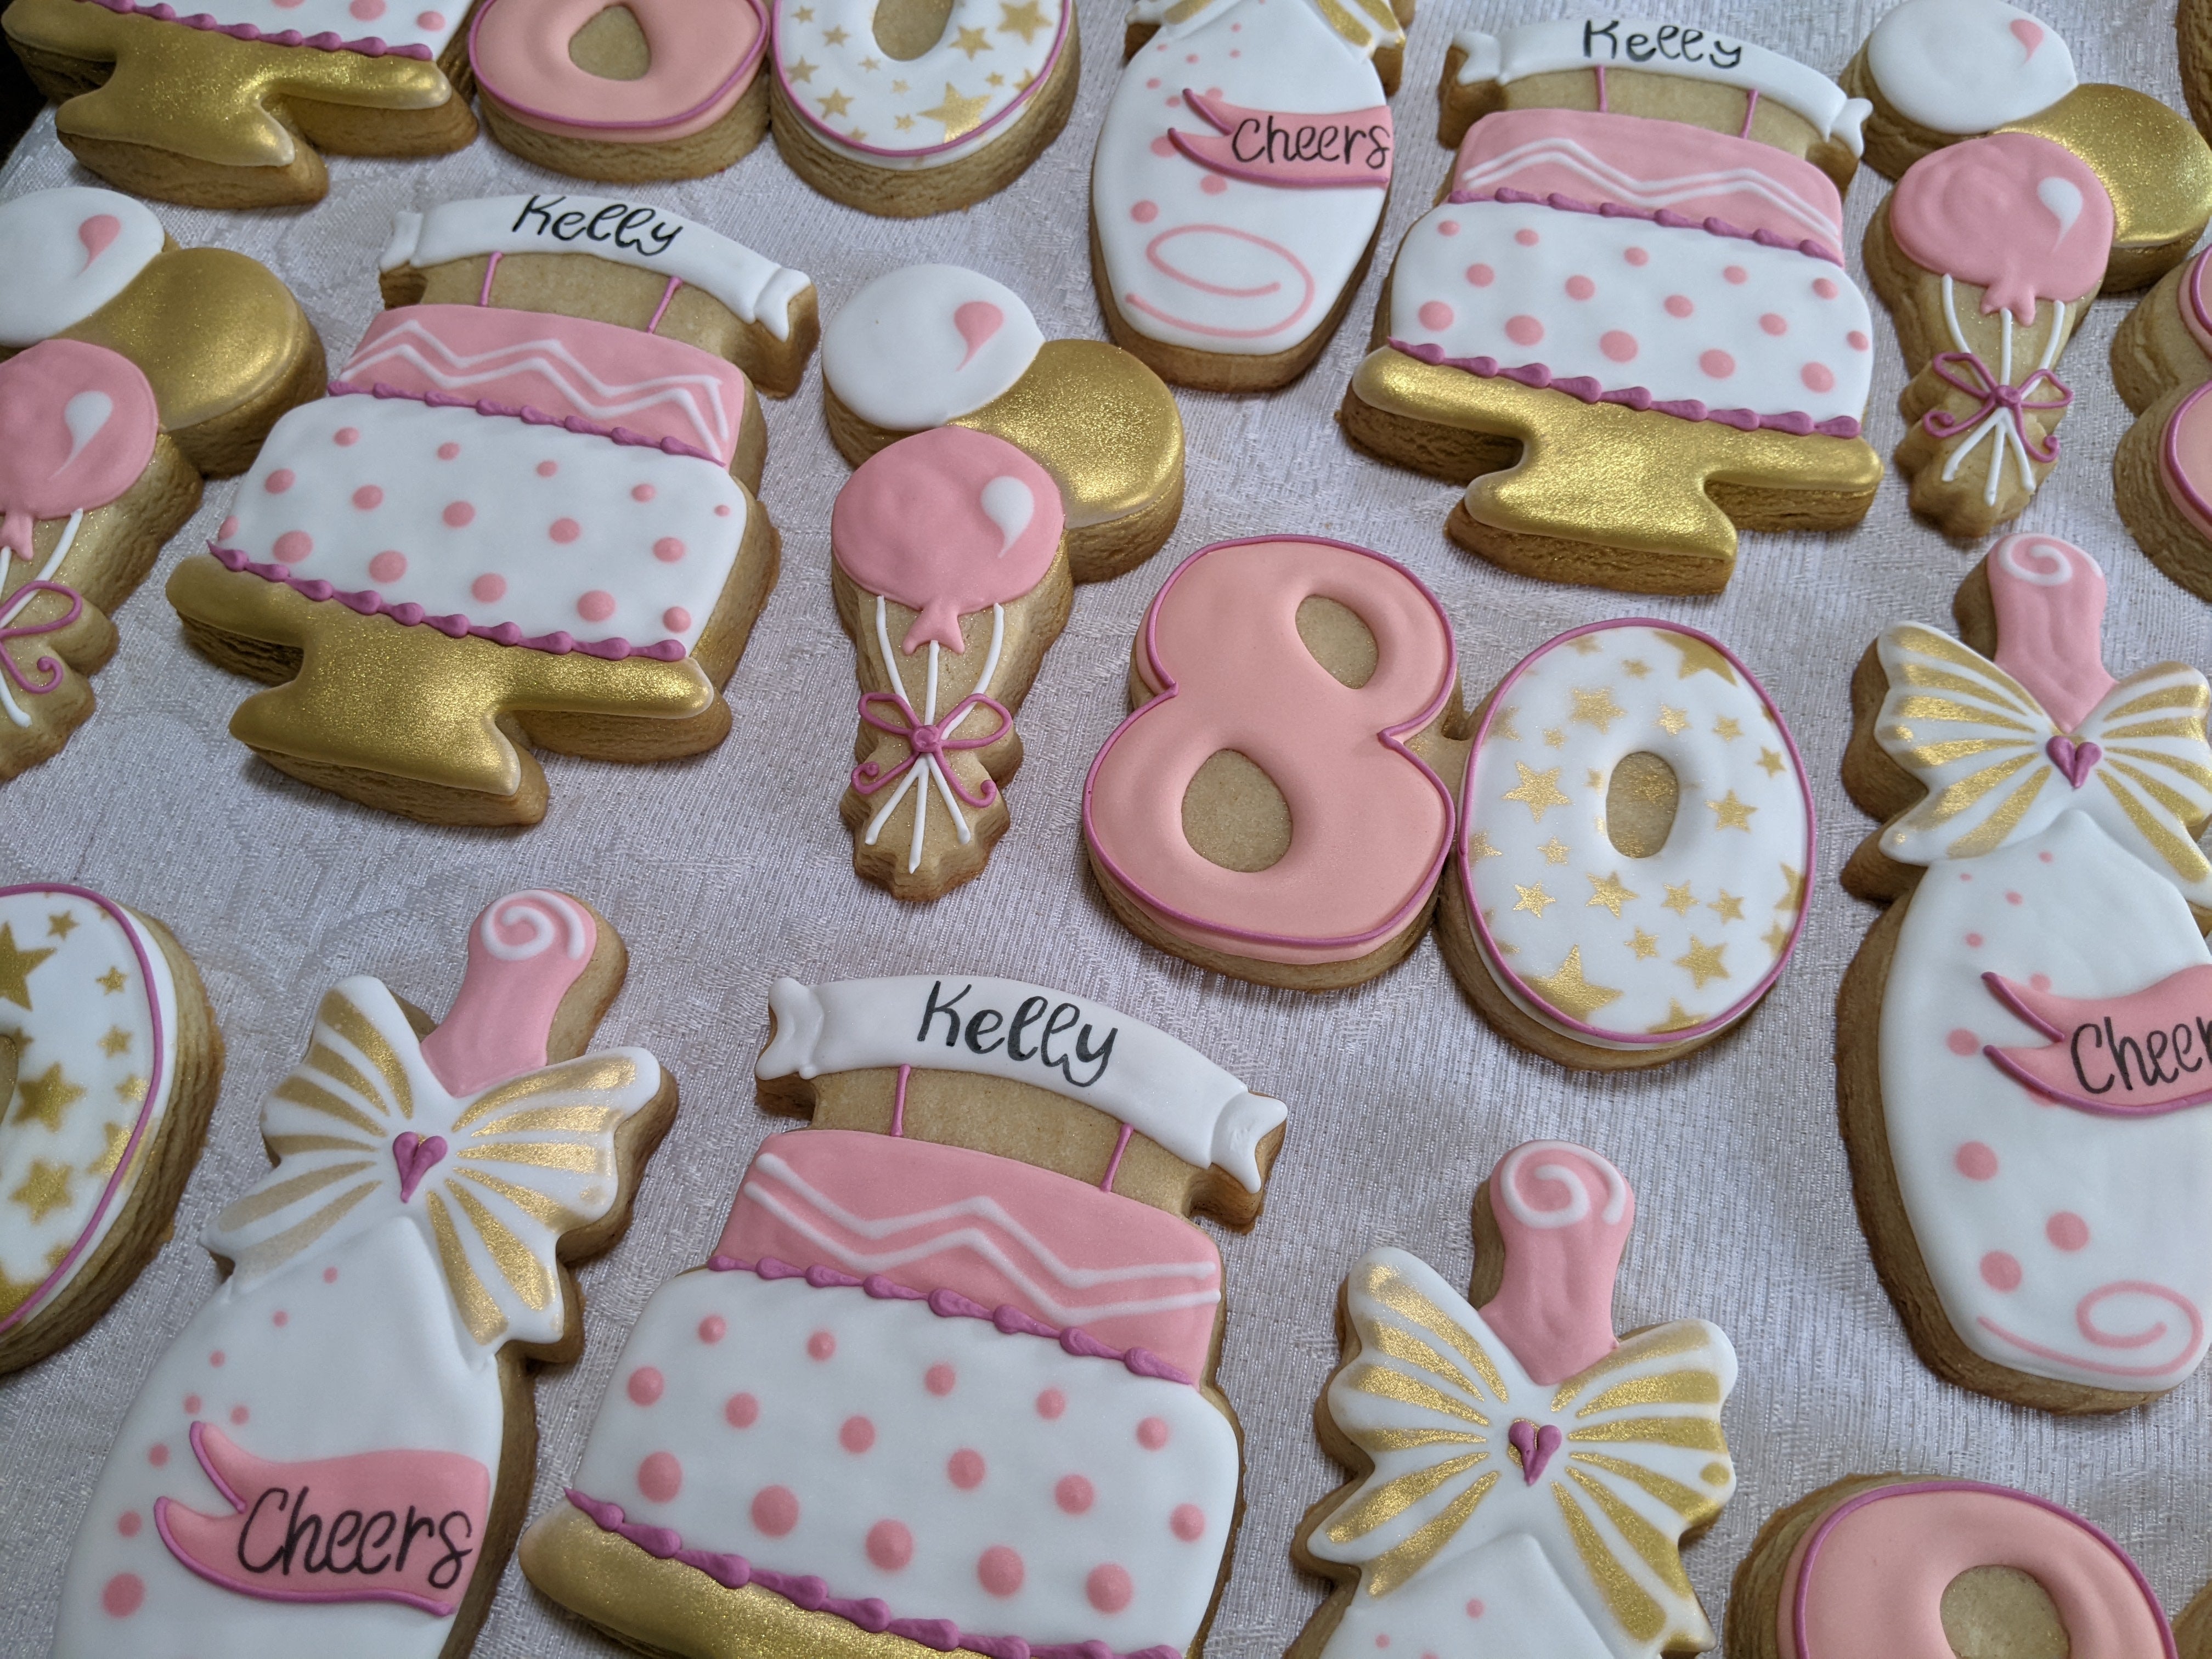 80th Birthday Party 24 Personalized Decorated Cookies